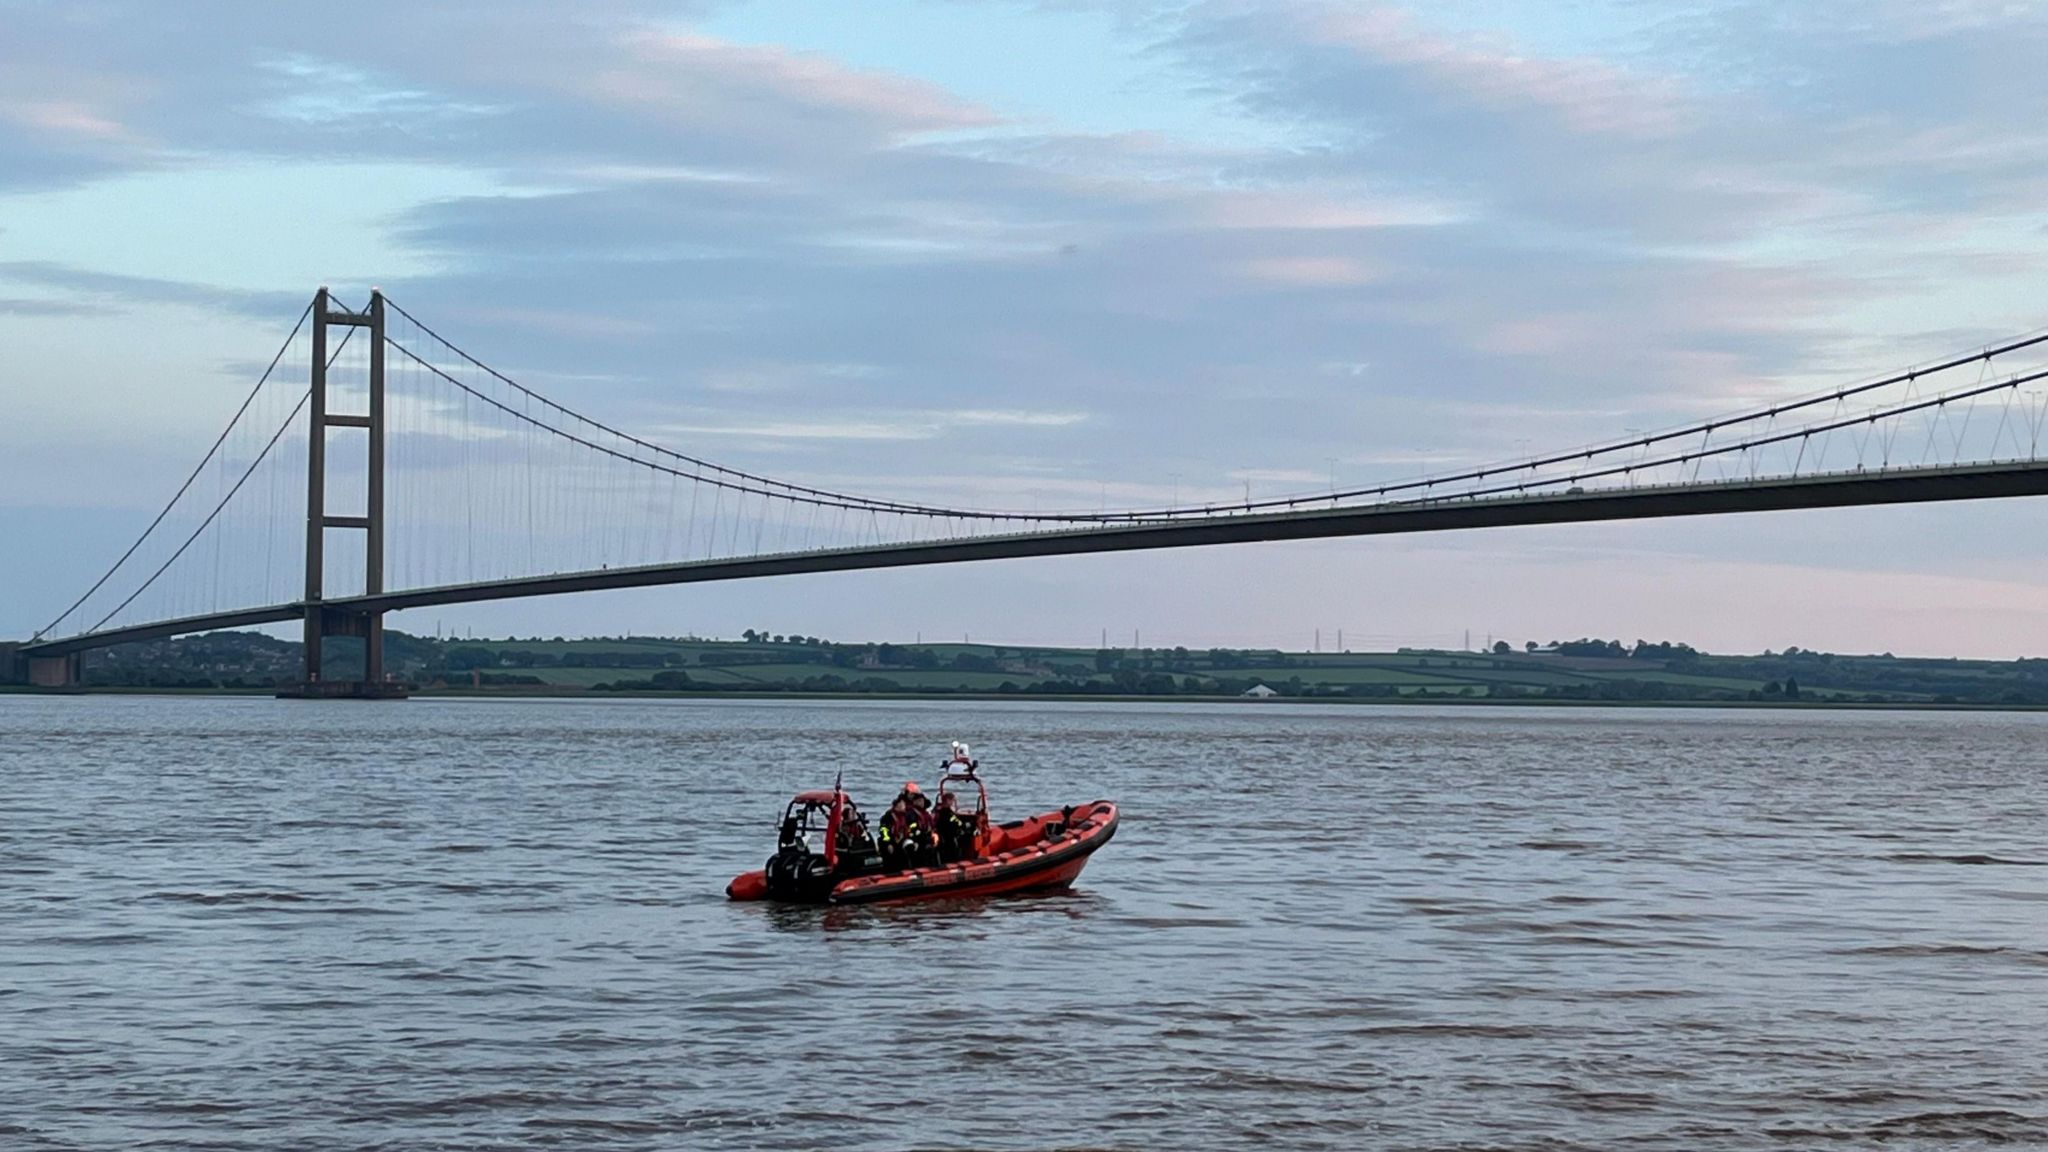 A Humber Rescue boat laying a poppy wreath in the water with Humber Bridge in the background